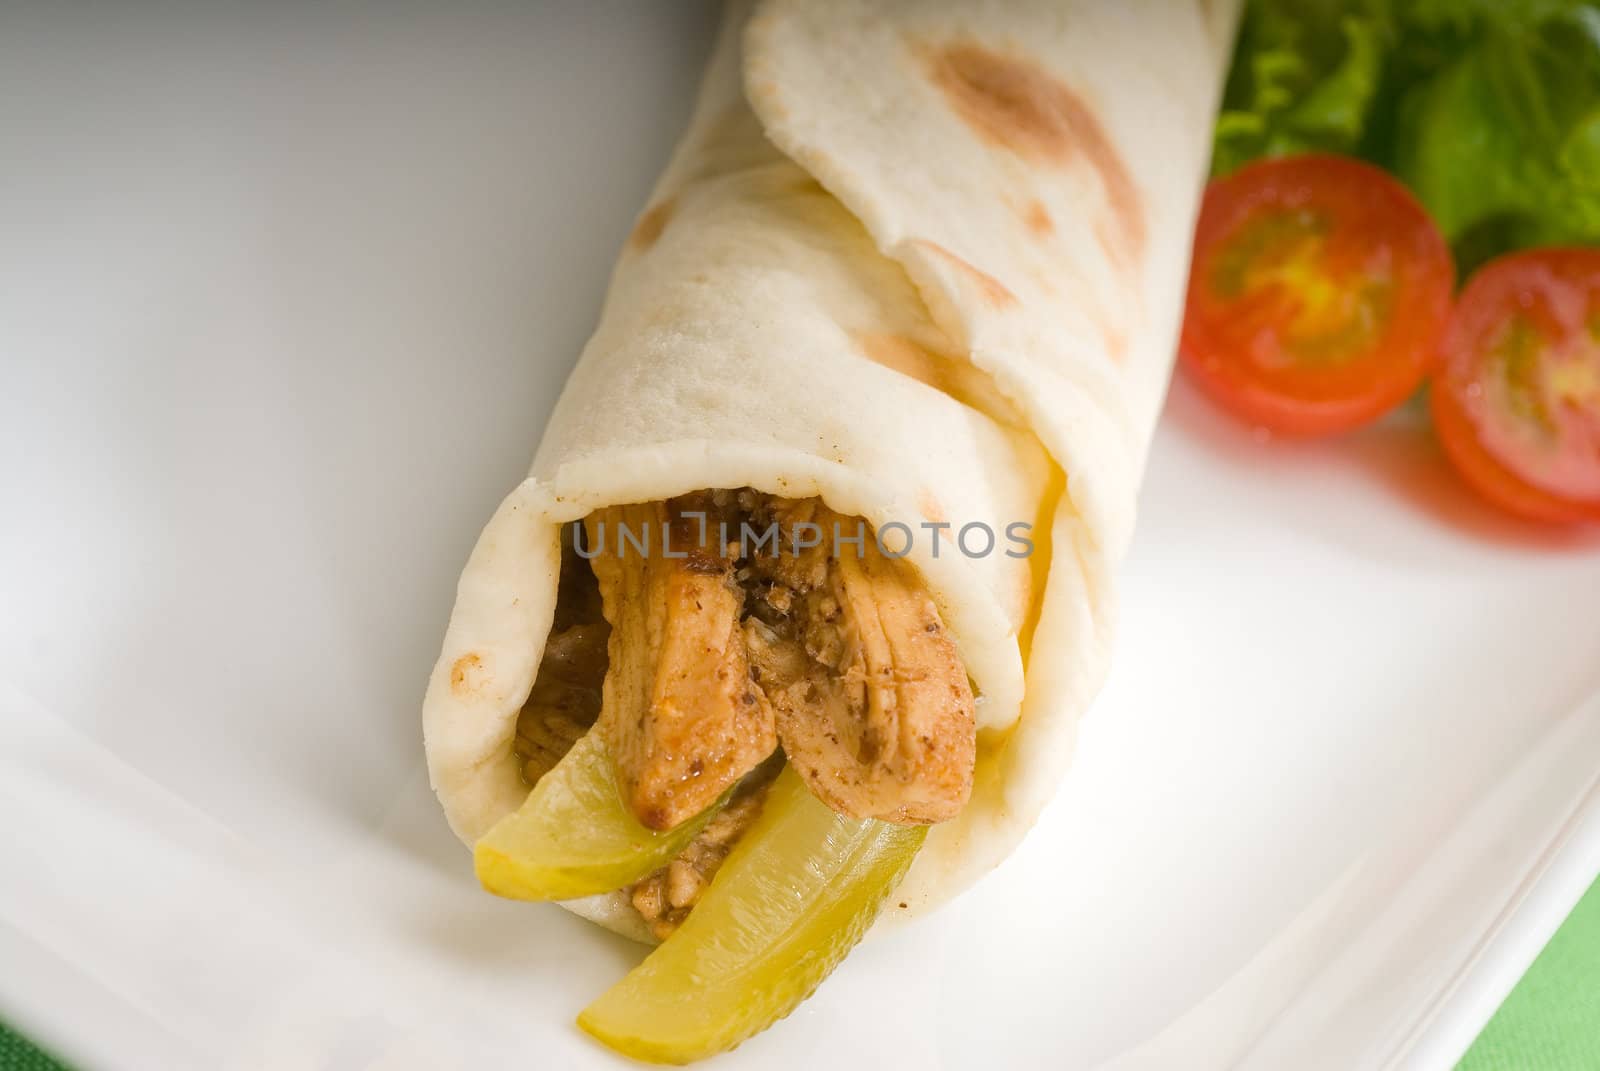 pita bread chicken roll with pickles cucumbers on a plate with pachino tomatoes and lettuce